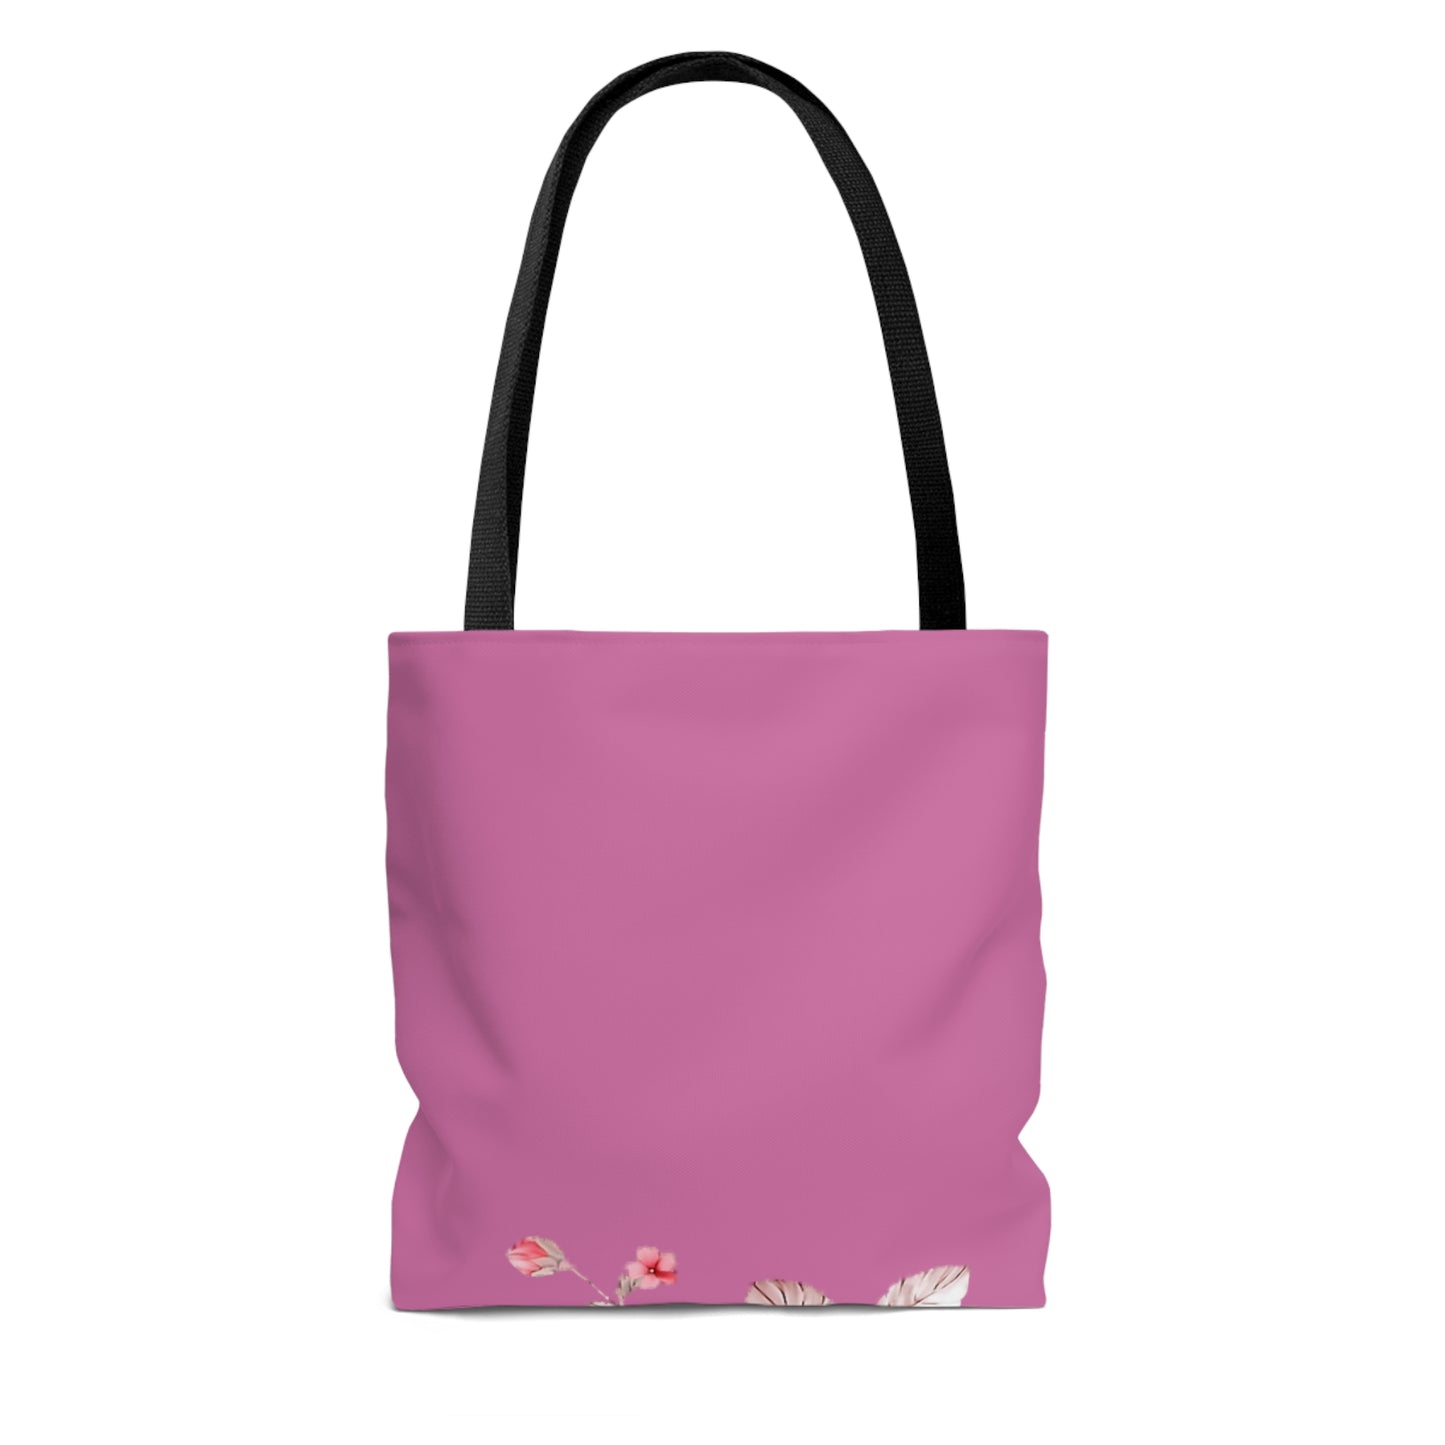 Beautiful Bag for Women, unique design, strong women who need comfort, perfect gift